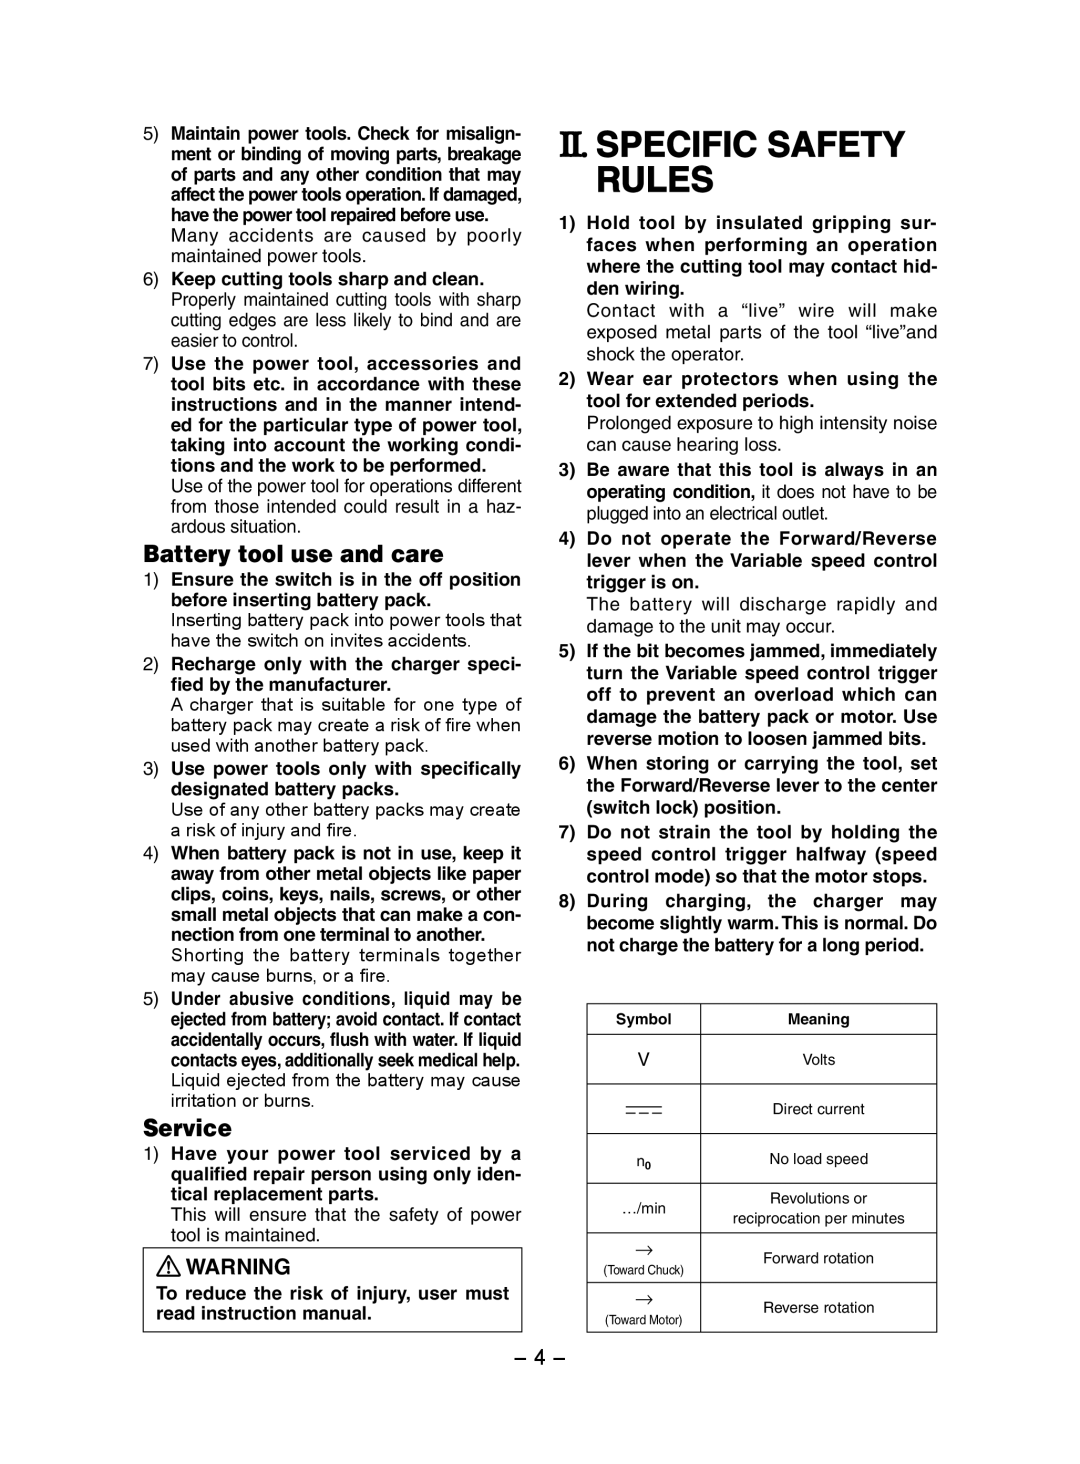 Panasonic EY7202 operating instructions Ii. Specific Safety Rules, Battery tool use and care, Service 